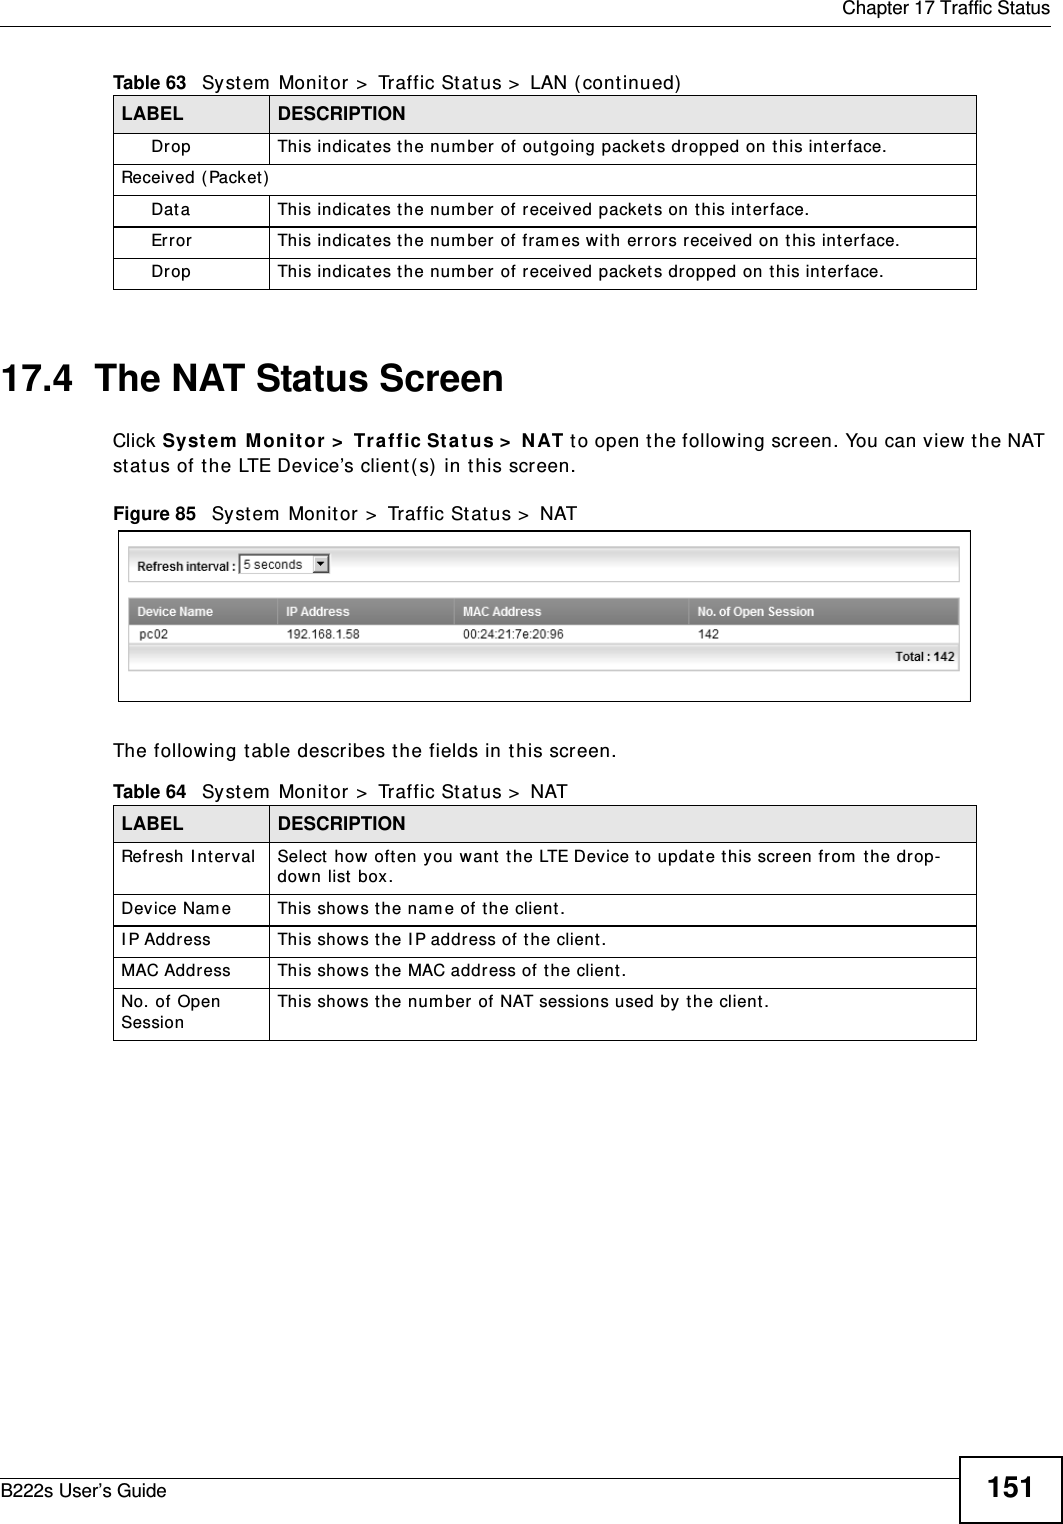  Chapter 17 Traffic StatusB222s User’s Guide 15117.4  The NAT Status ScreenClick Syst e m  Monit or  &gt;  Tr a ffic St a tus &gt;  N AT t o open t he following screen. You can view t he NAT st at us of t he LTE Device’s client( s)  in t his screen.Figure 85   System  Monitor &gt;  Traffic Stat us &gt;  NATThe following t able describes t he fields in t his screen.  Drop This indicates t he num ber of out going packet s dropped on t his int erface.Receiv ed ( Packet )  Data  This indicates t he num ber of received packets on this int erface.Error This indicates t he num ber of fram es wit h errors received on t his interface.Drop This indicates t he num ber of received packet s dropped on t his interface.Table 63   Syst em  Monit or &gt;  Traffic St atus &gt;  LAN ( cont inued)LABEL DESCRIPTIONTable 64   Syst em  Monit or &gt;  Traffic St atus &gt;  NATLABEL DESCRIPTIONRefresh I nt erval Select  how  oft en y ou want  the LTE Device t o updat e t his screen fr om  t he drop-down list box.Device Nam e This show s the nam e of the client.I P Address This shows t he I P address of t he client .MAC Address This shows t he MAC addr ess of t he client .No. of Open SessionThis shows t he num ber of NAT sessions used by the client .